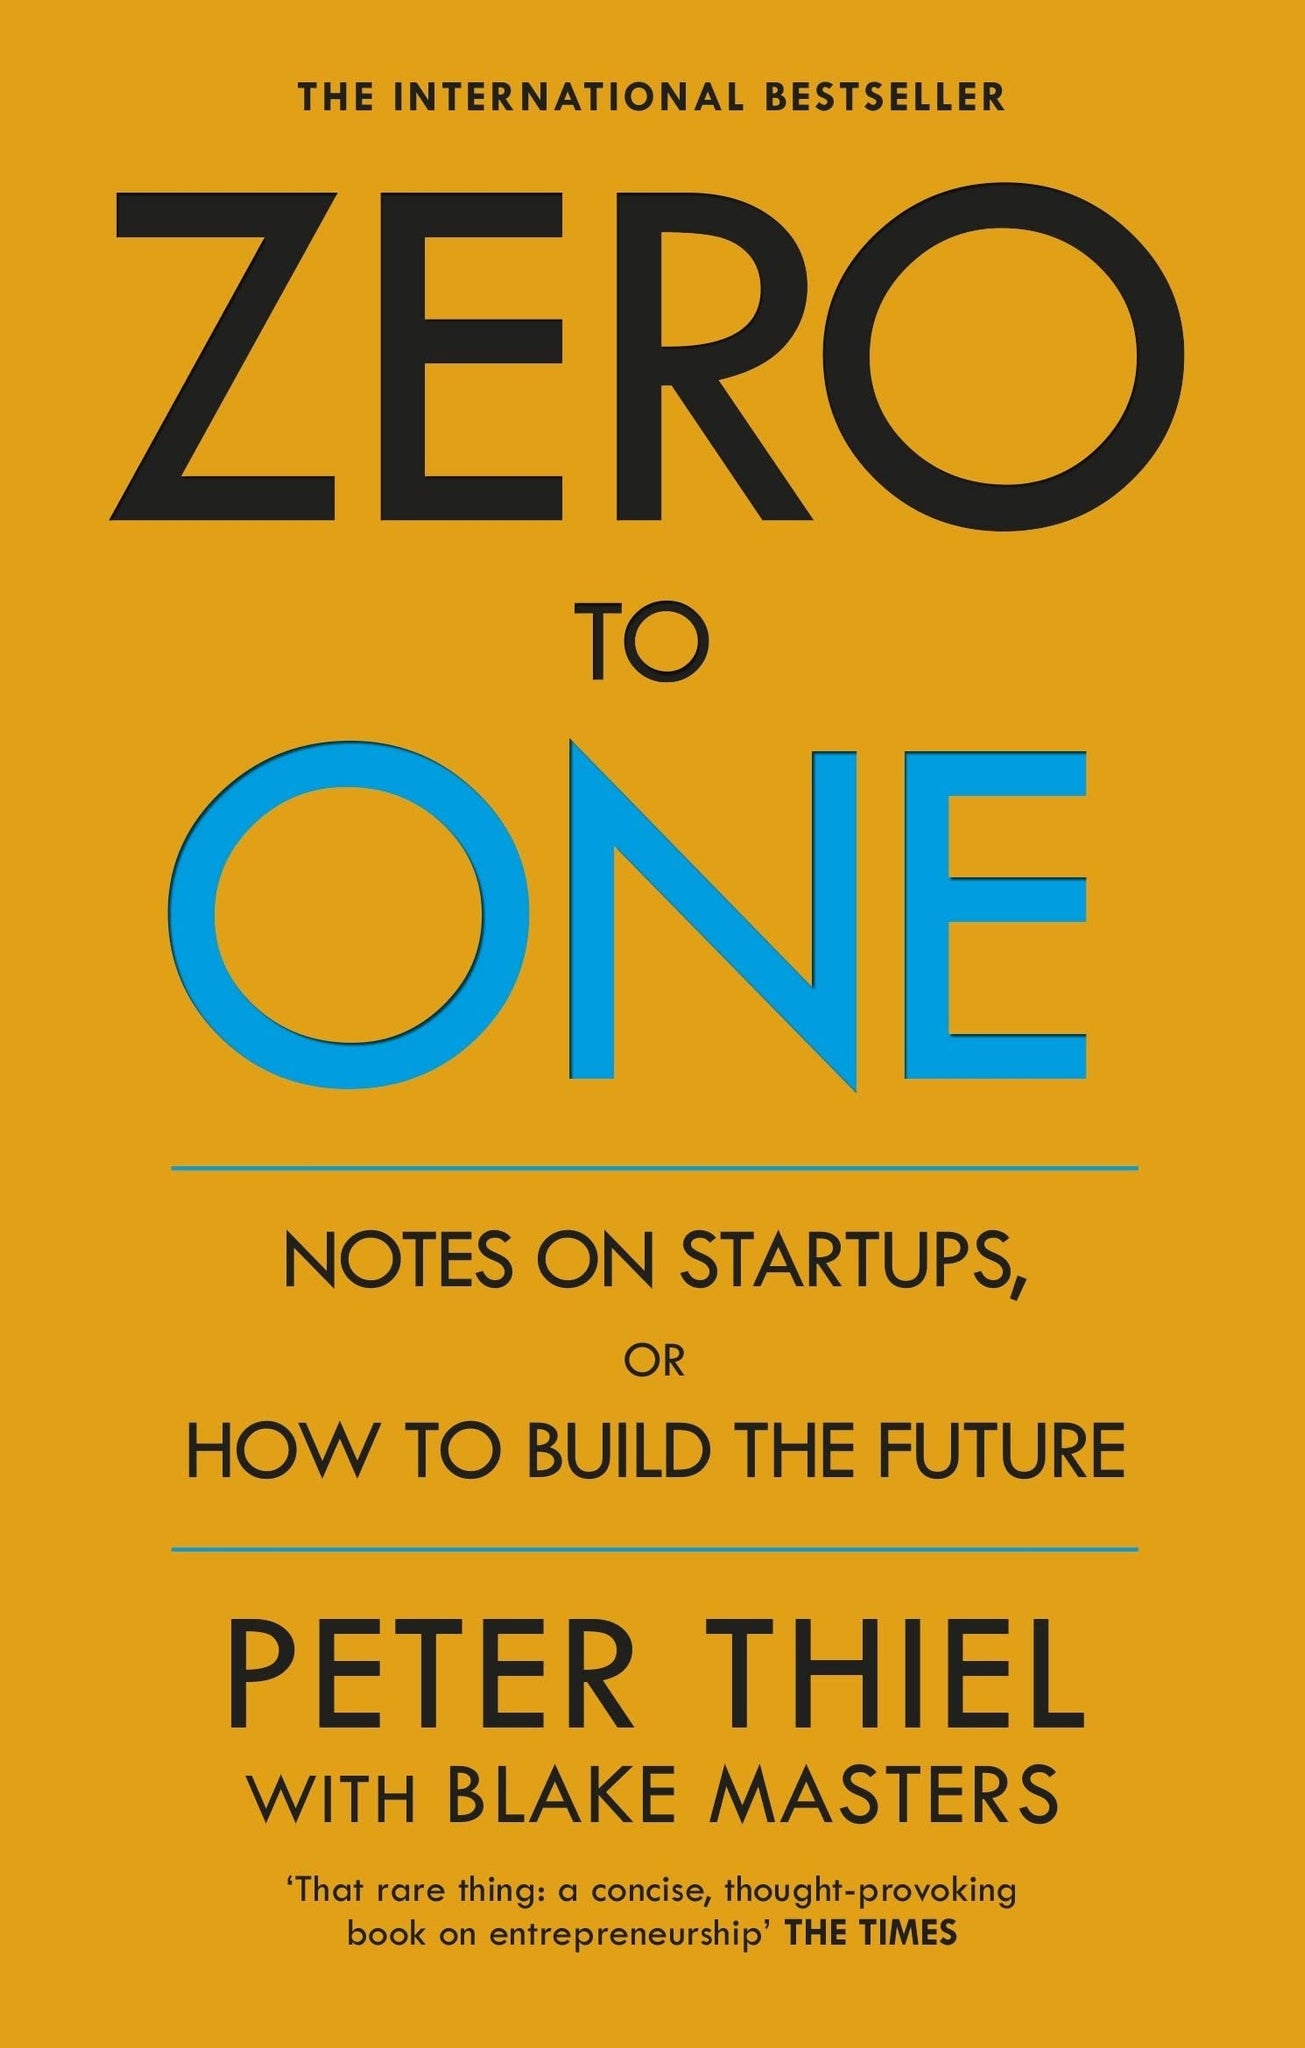 Zero to One: Notes on Startups, or How to Build the Future